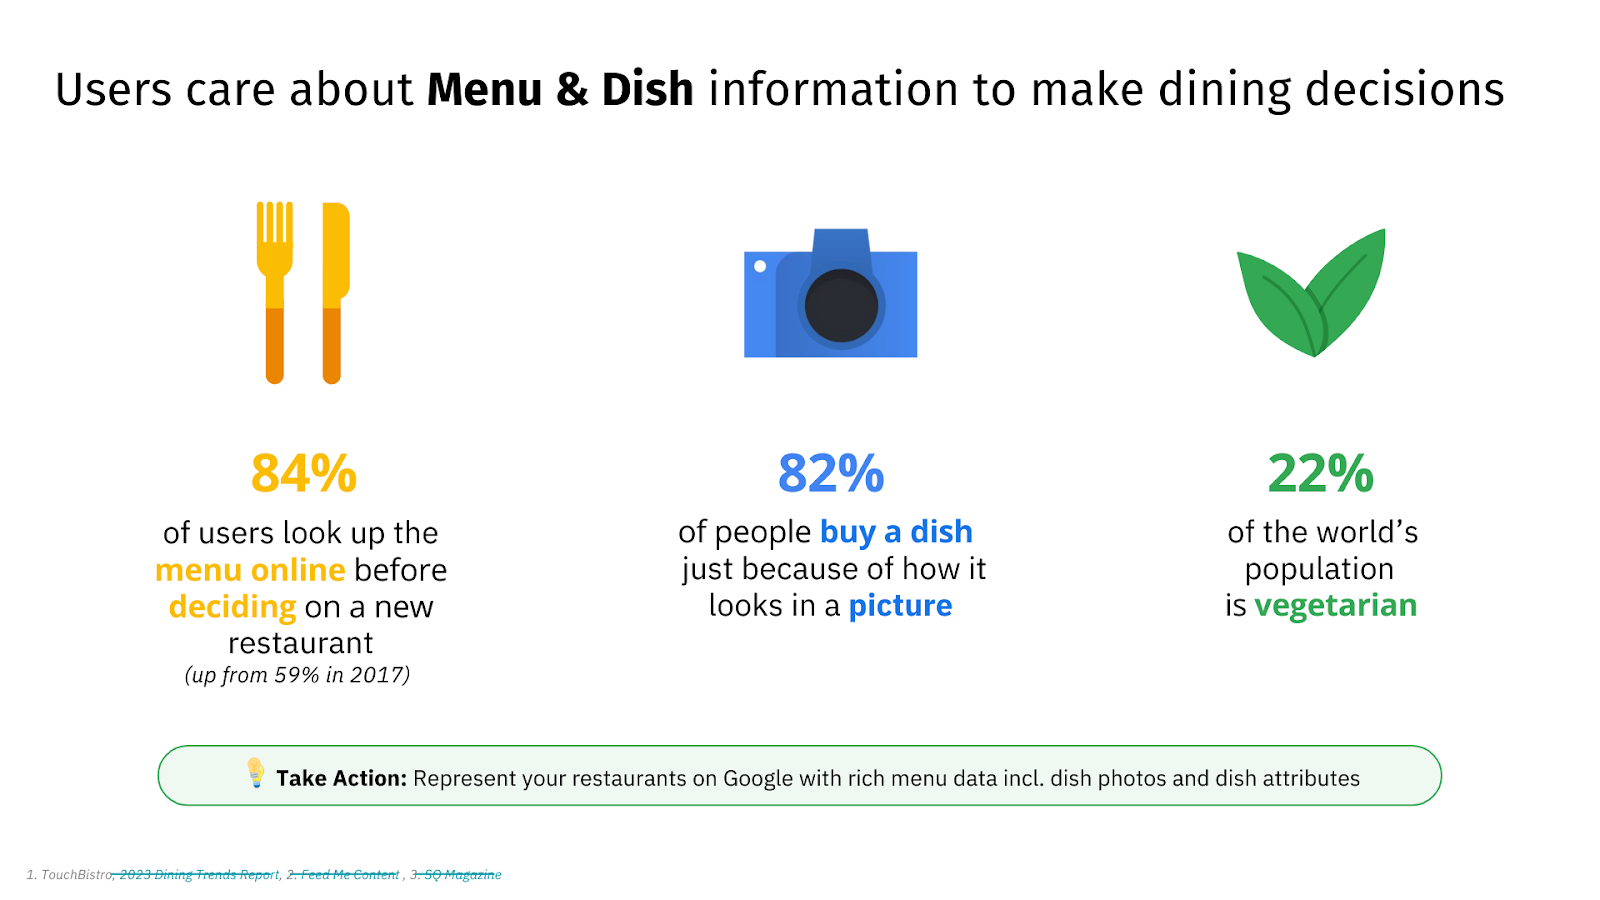 Users care about Menu & Dish information to make dining decisions